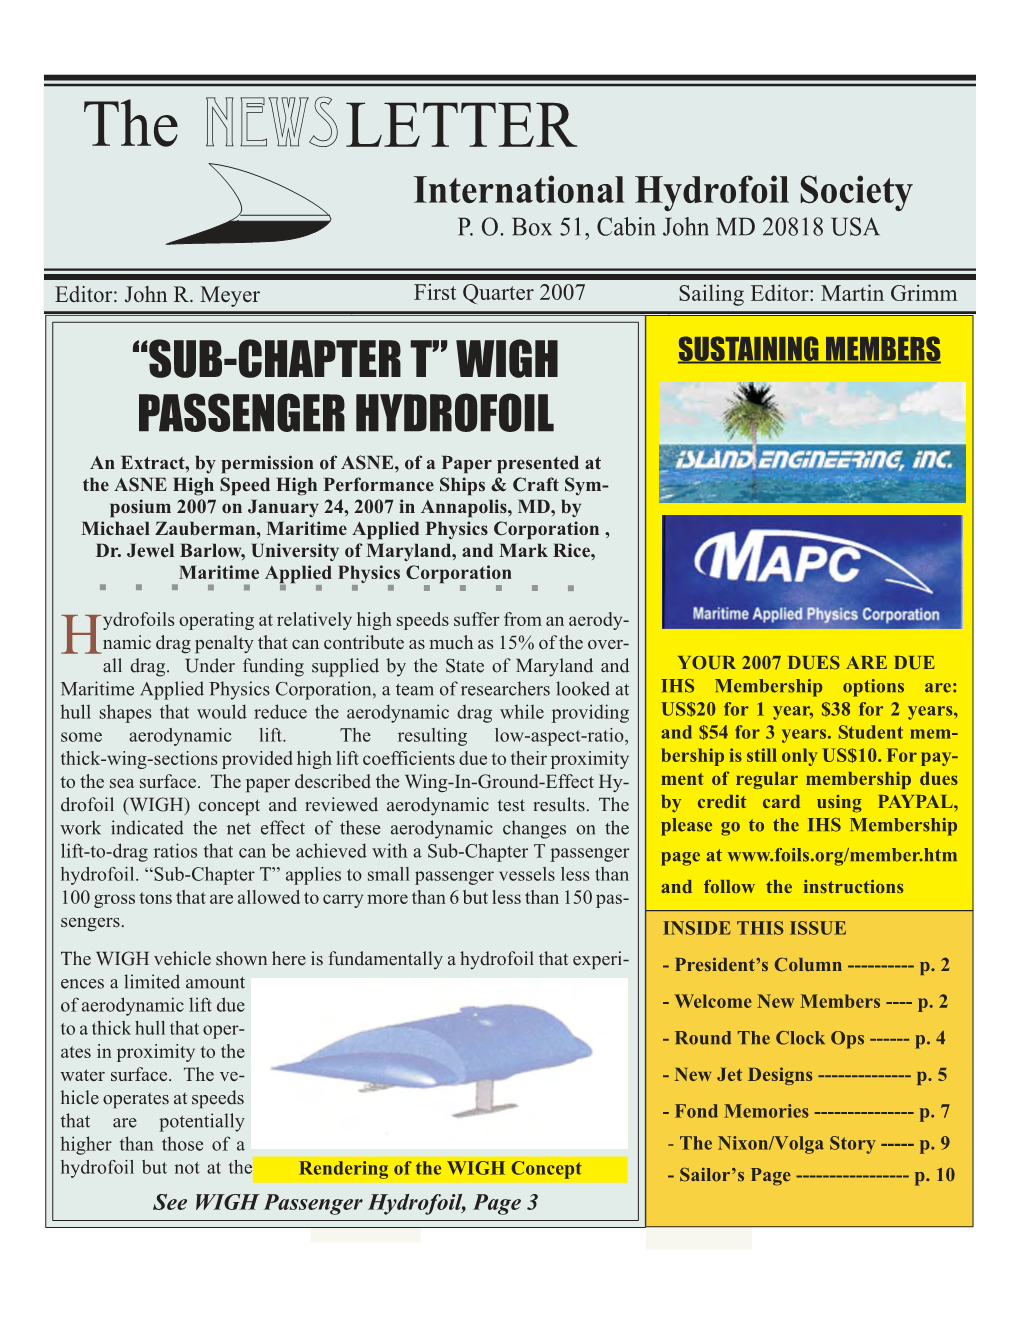 IHS Newsletters for 2007